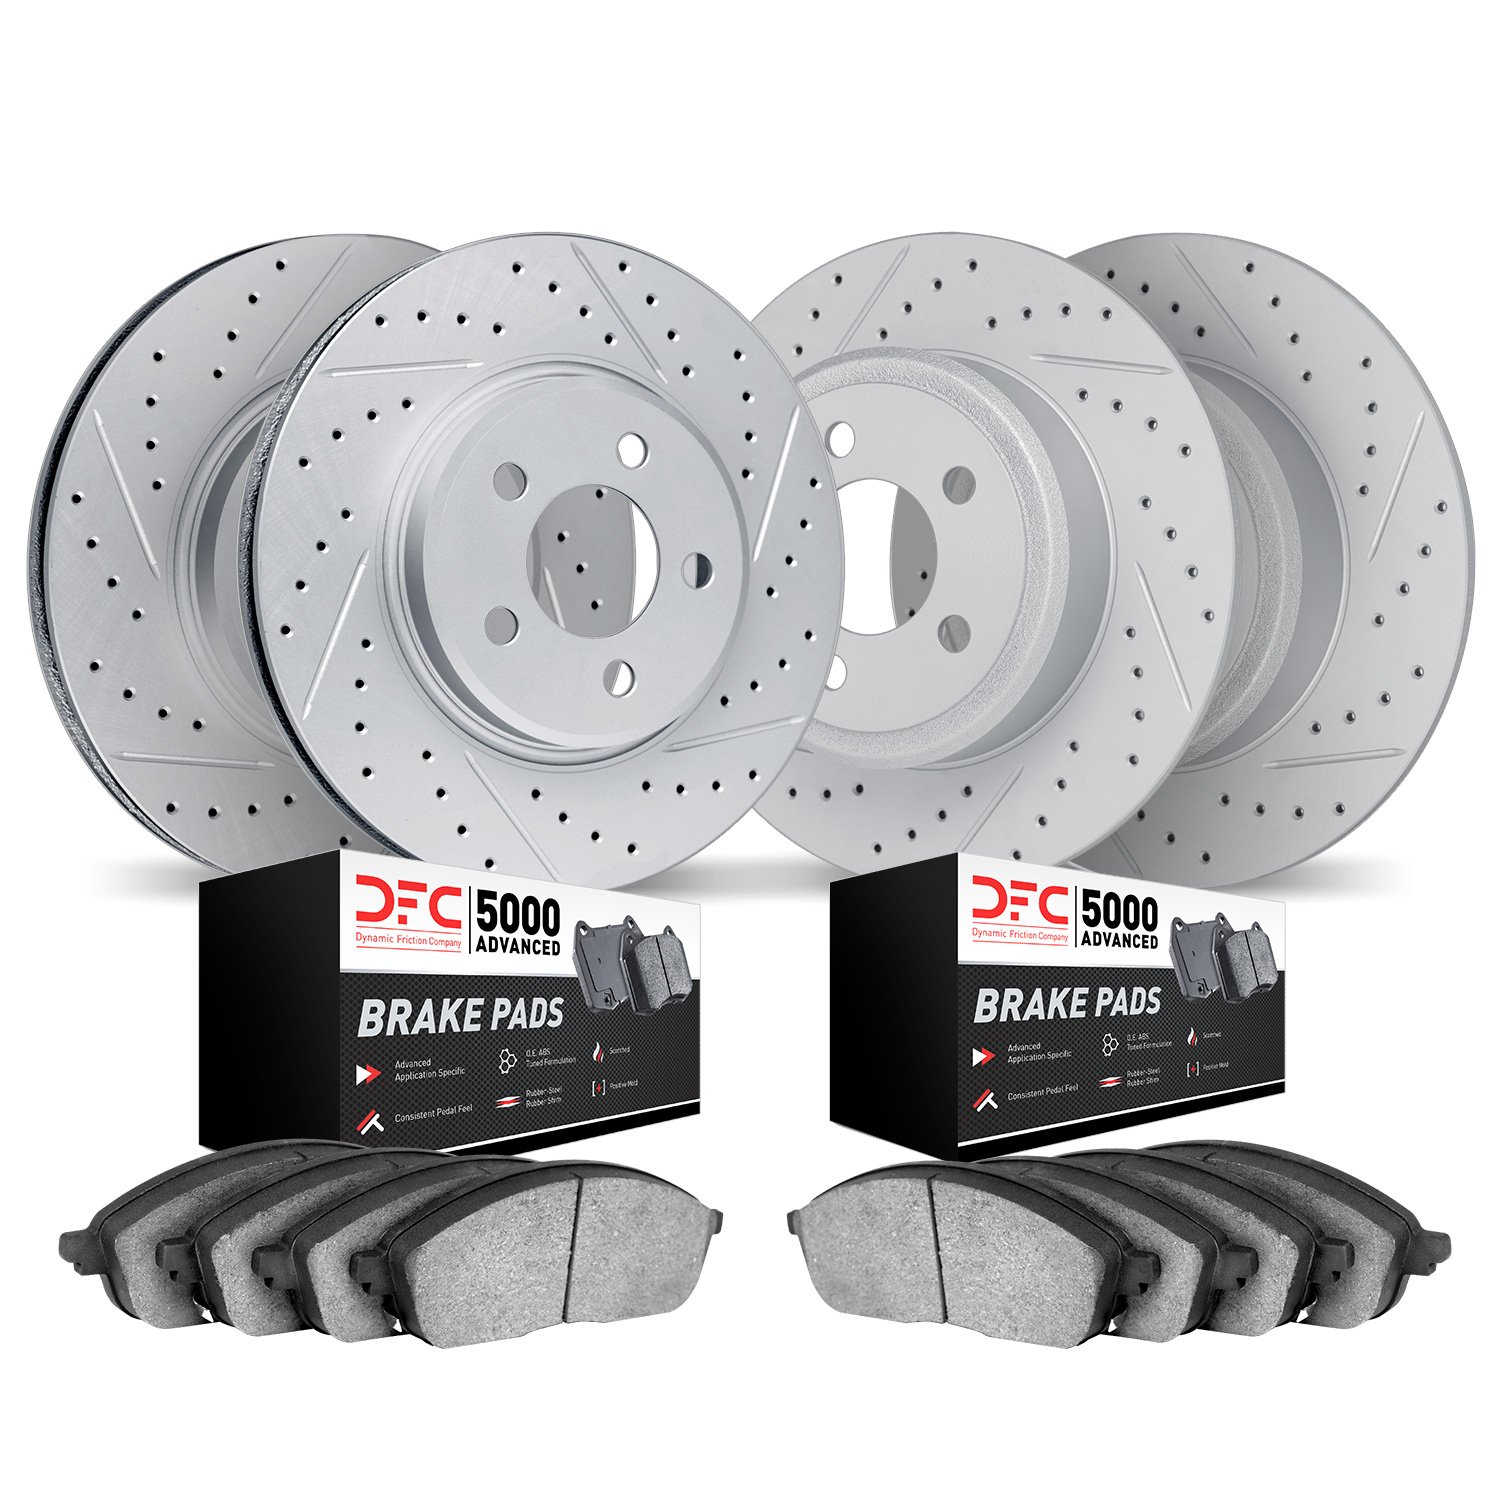 2504-13002 Geoperformance Drilled/Slotted Rotors w/5000 Advanced Brake Pads Kit, 2011-2015 Subaru, Position: Front and Rear